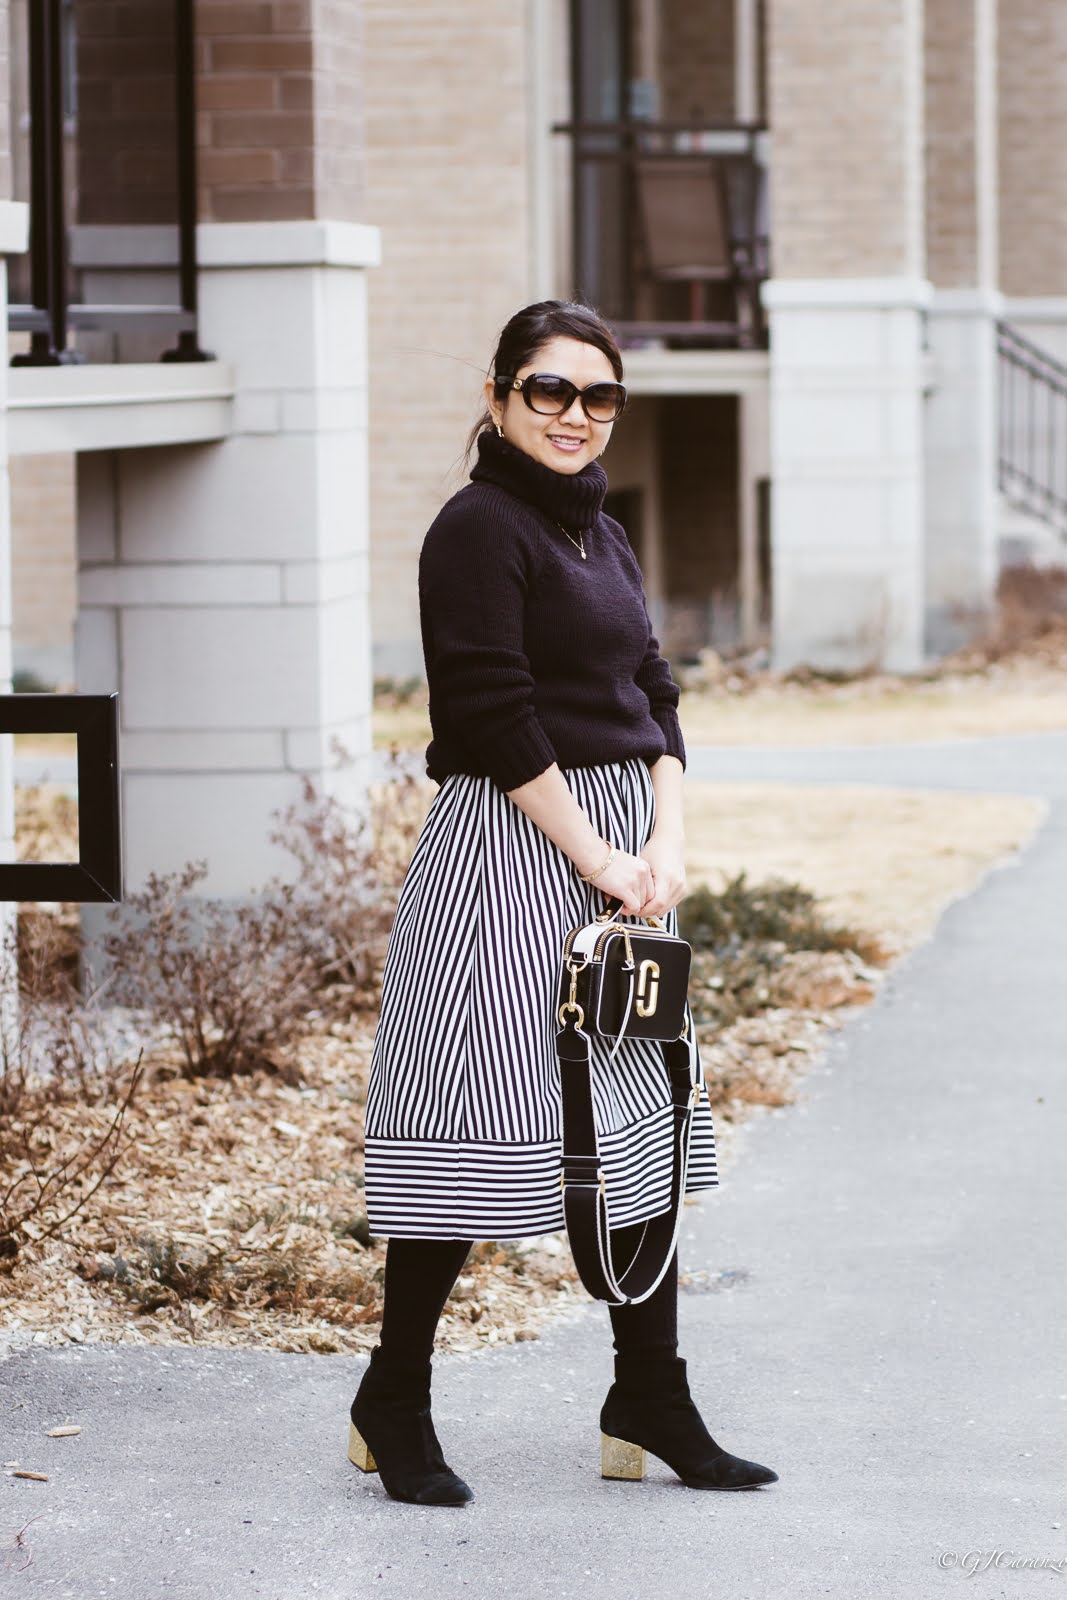 Uniqlo Turtleneck Sweater | Forever21 Stripe Midi Skirt | Marc Jacobs Sure Shot Bag | Steve Madden Suede Booties | Cold Weather Outfit | Gucci Sunglasses | Petite Fashion